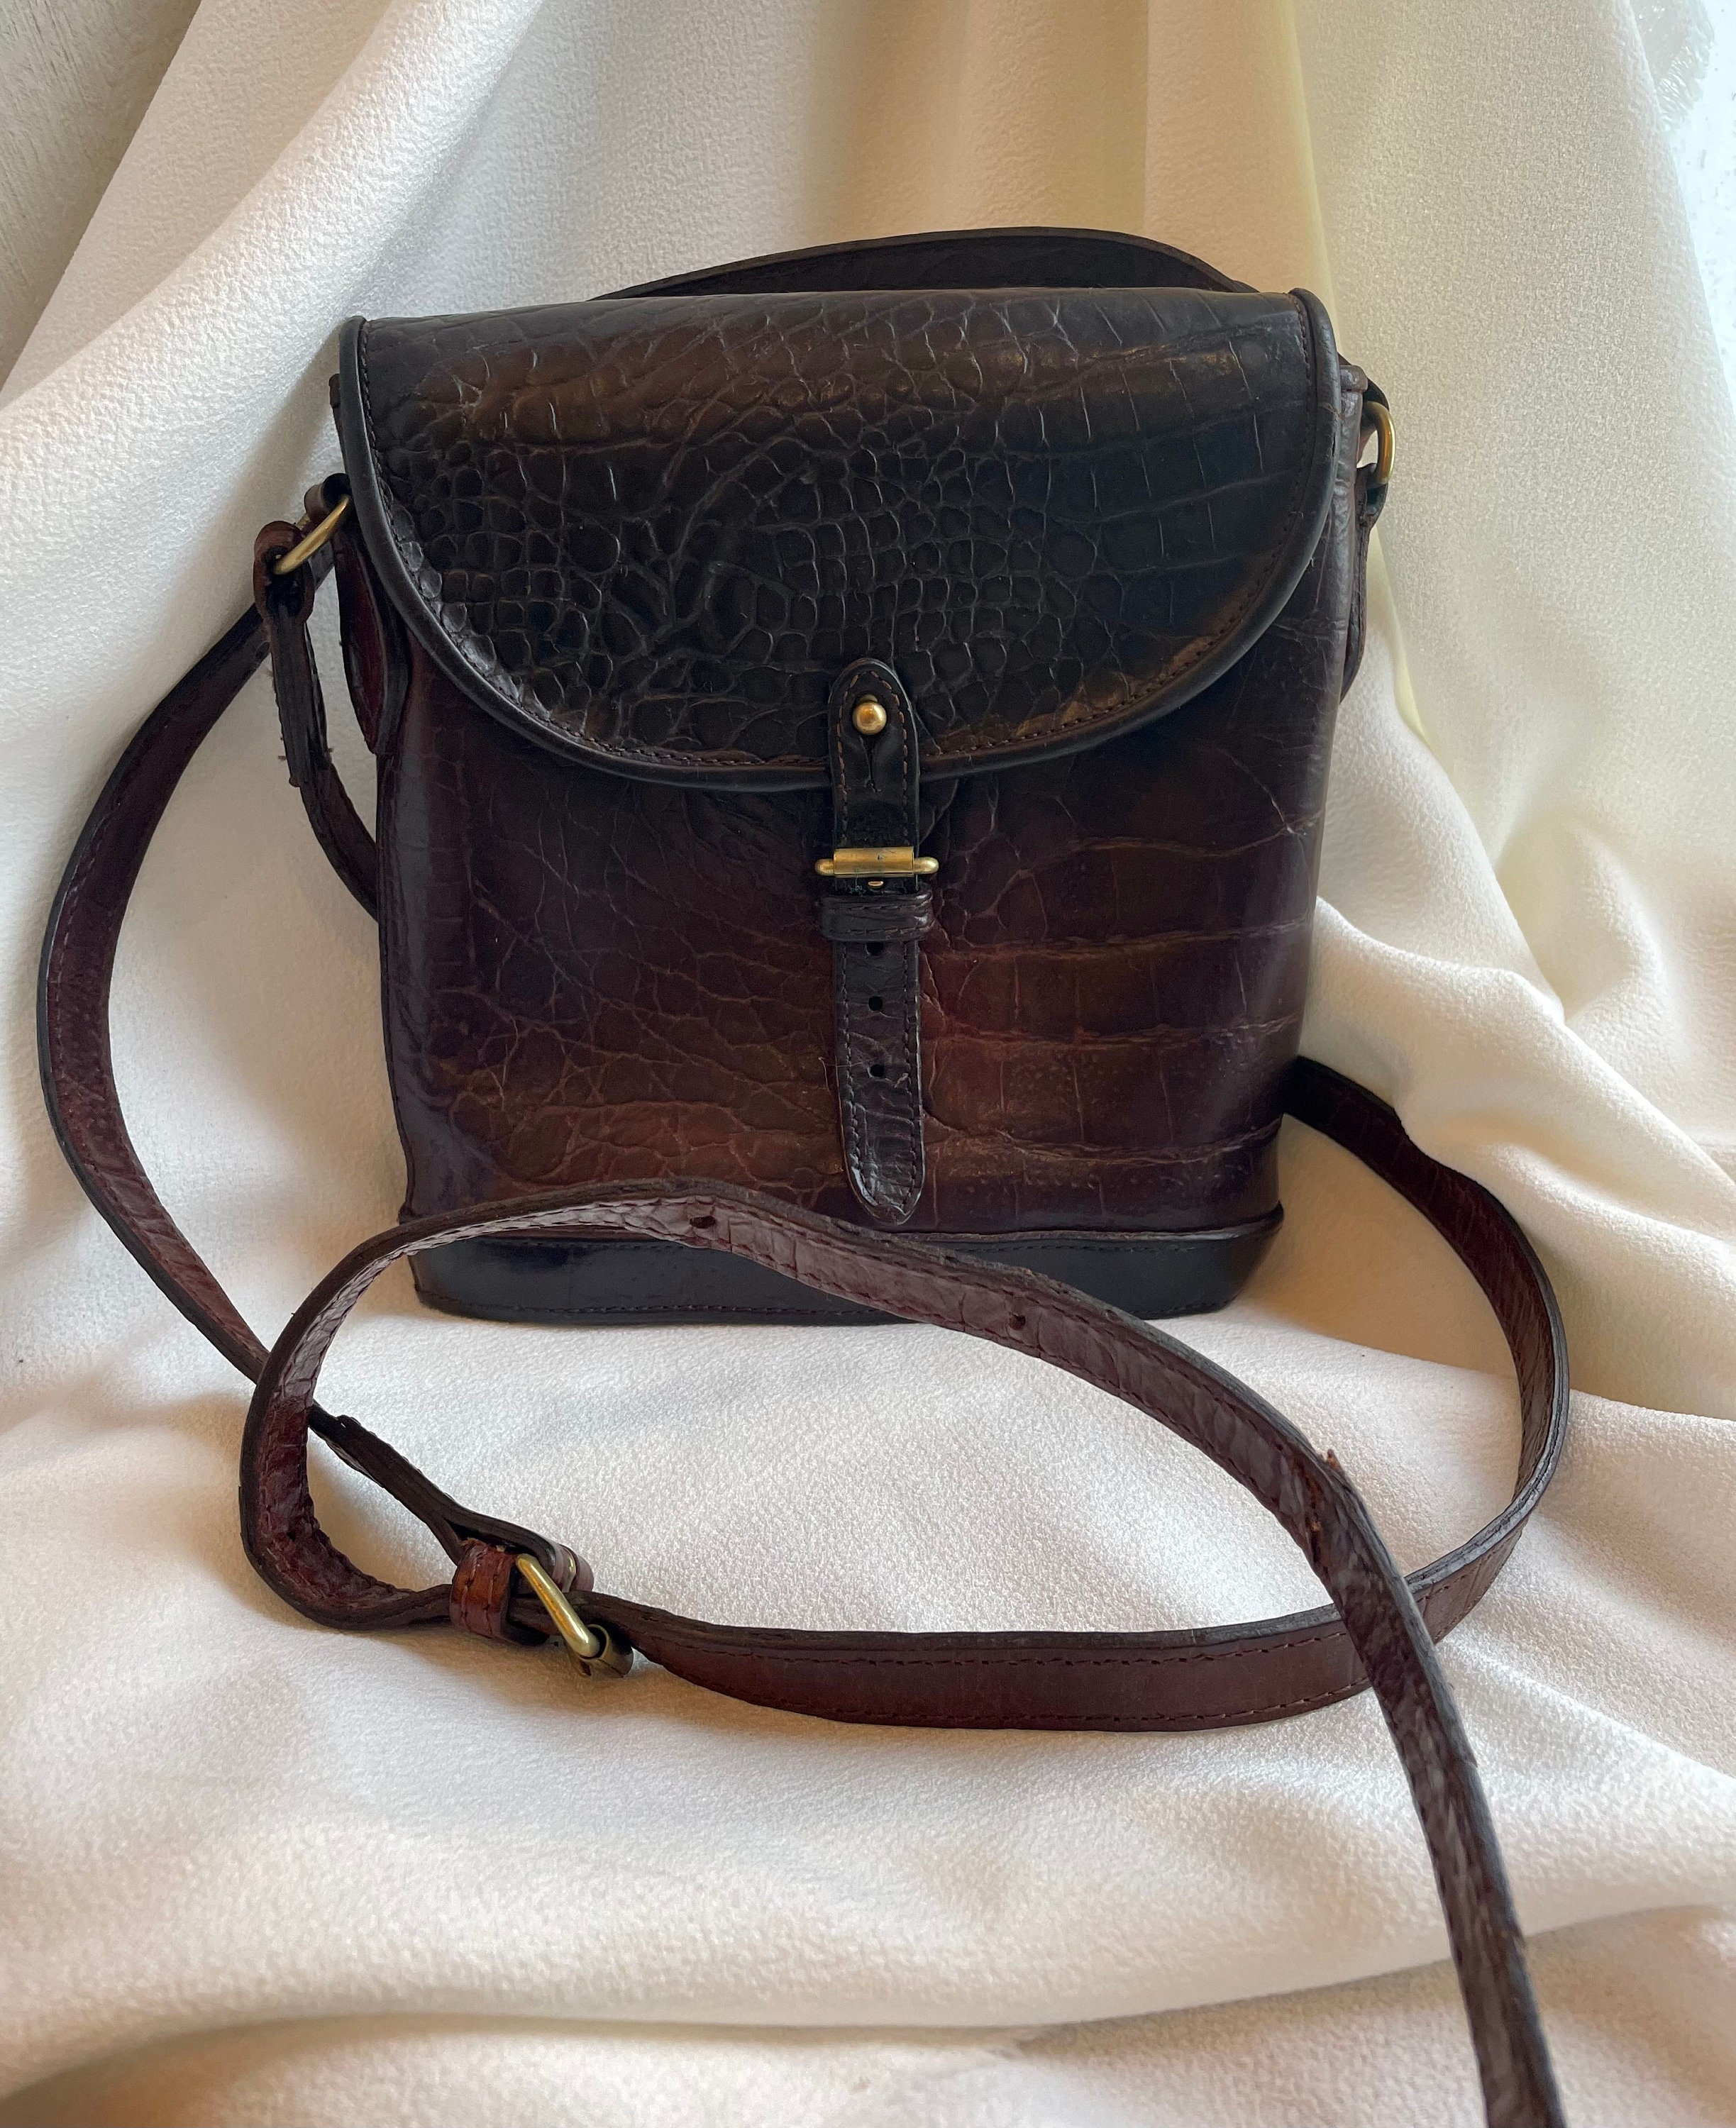 Authentic Vintage Mulberry Crossbody Bag Black Brown Pebbled Leather Purse